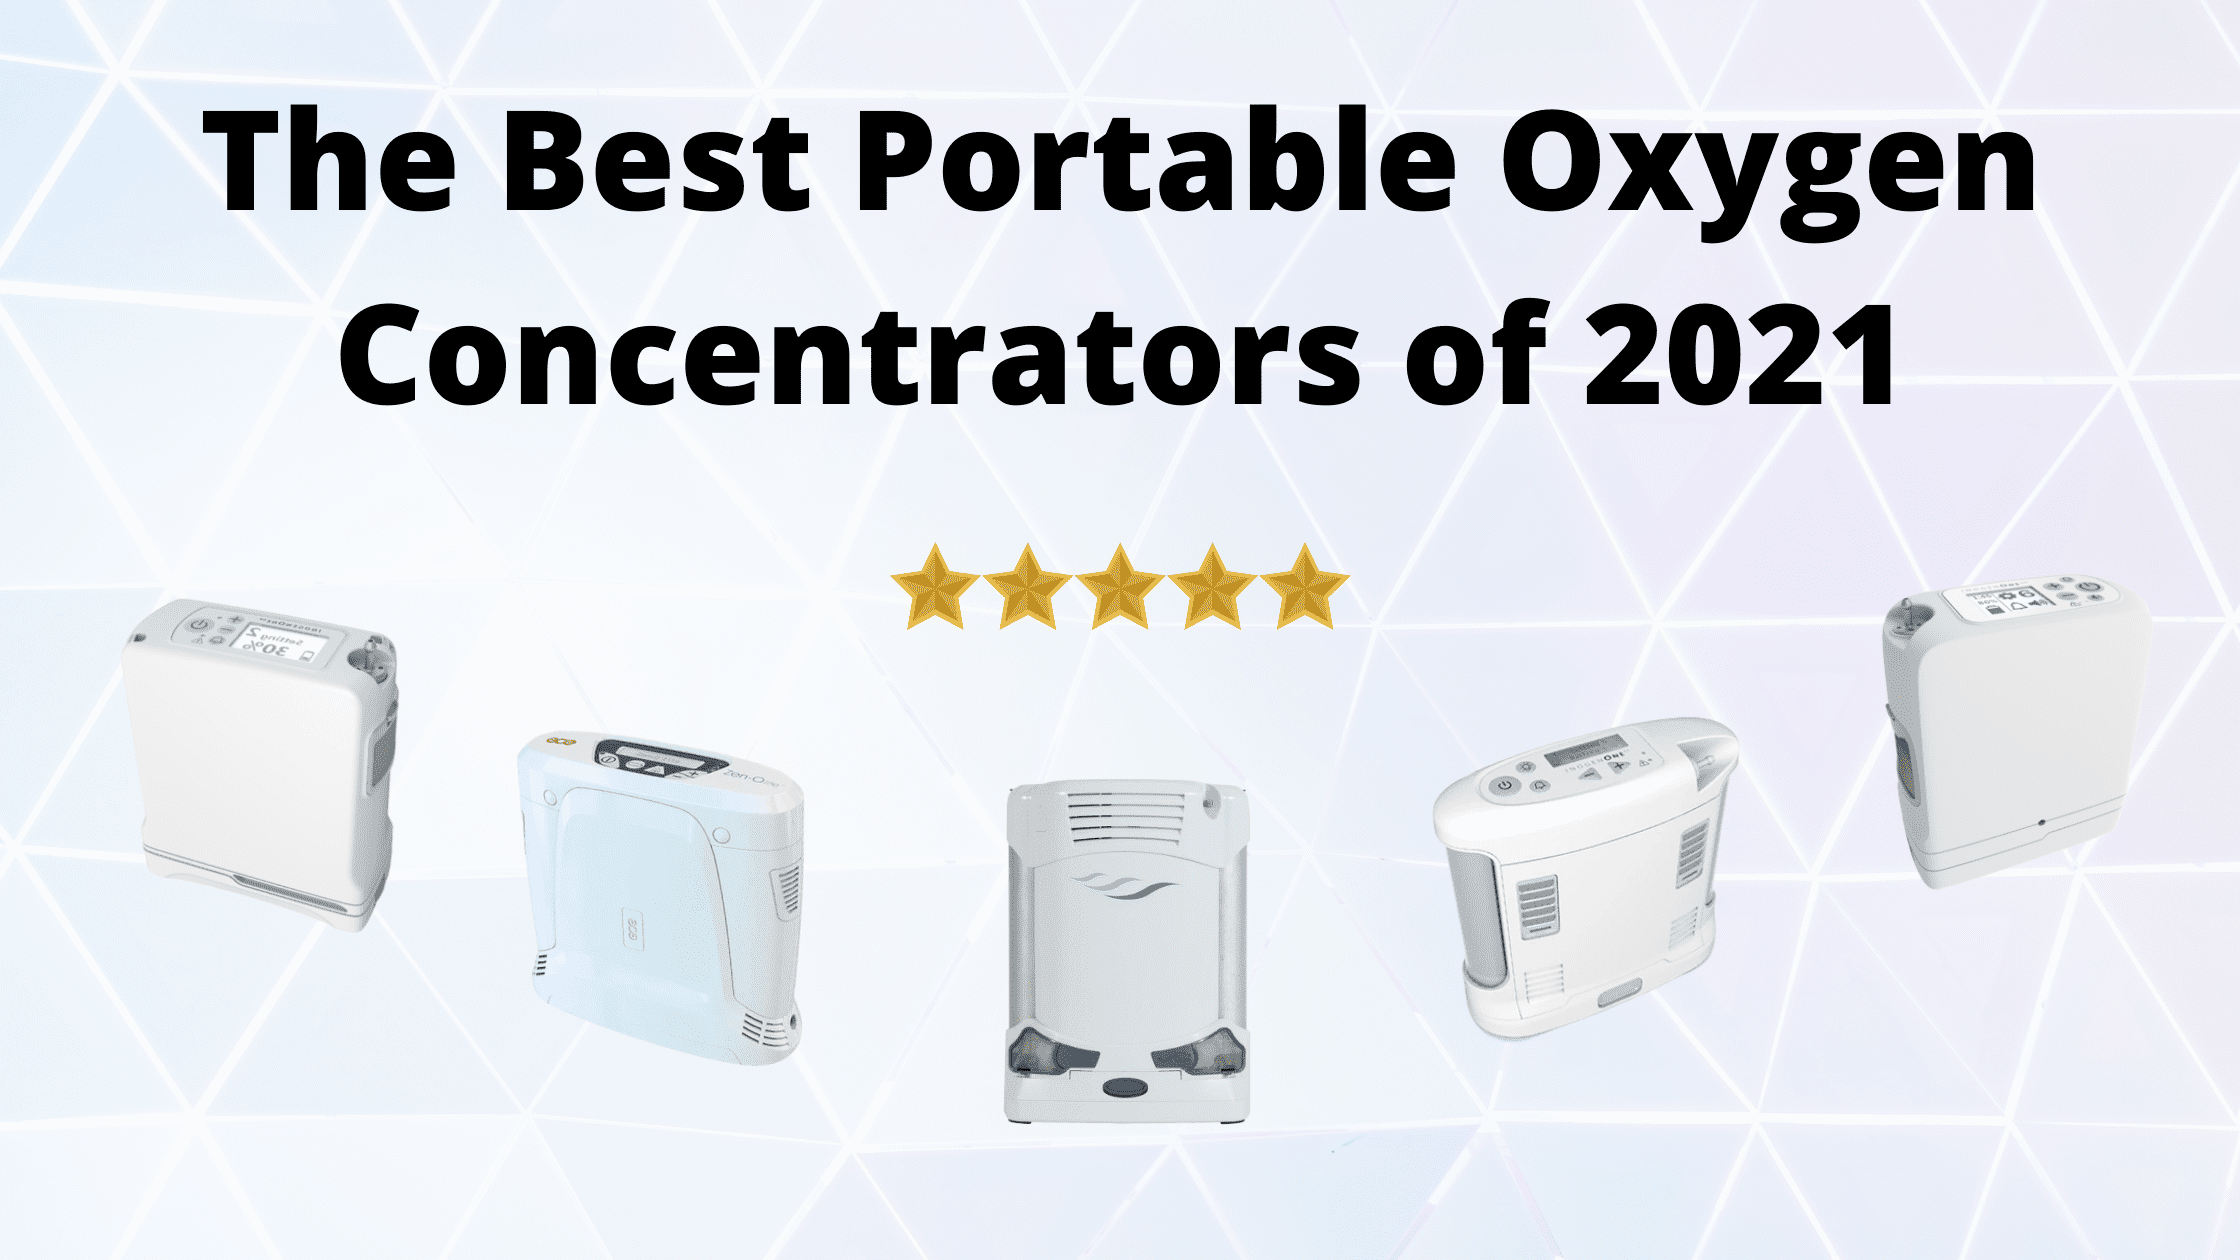 The Best Portable Oxygen Concentrators of 2021